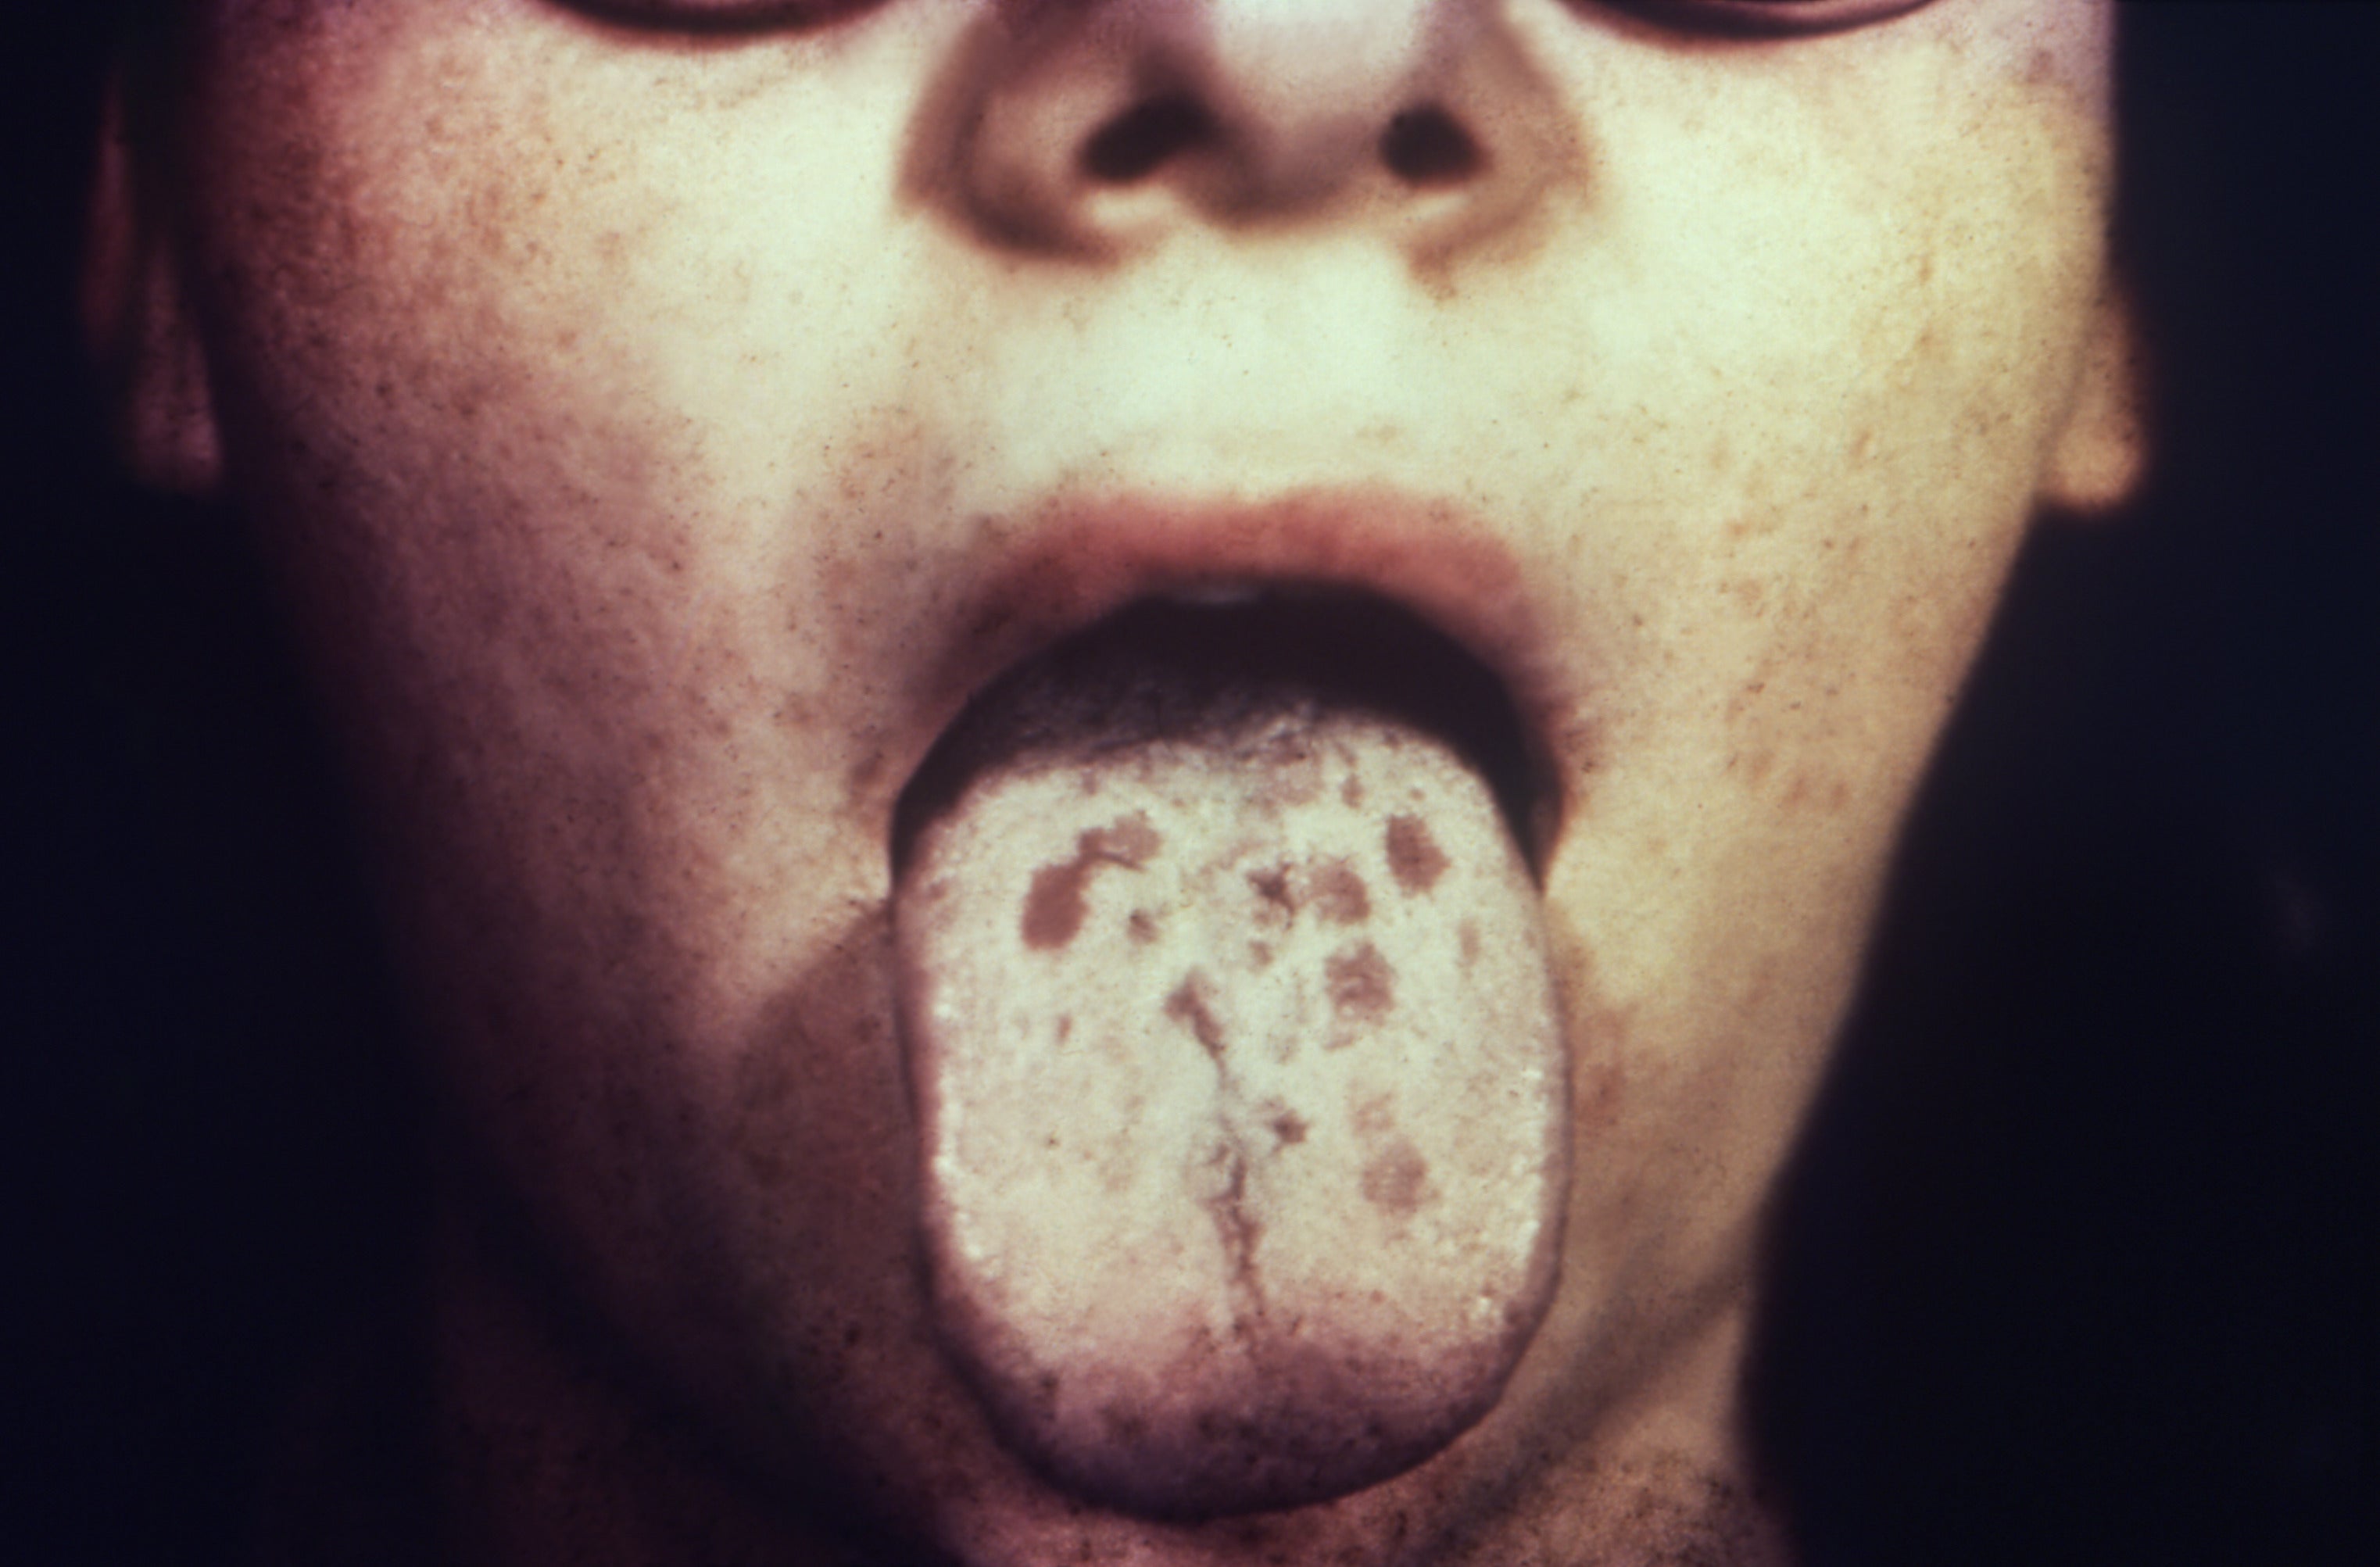 A photograph of someone with mucous patches on their tongue caused by secondary syphilis. (Photo: CDC/Dr. Henderson)